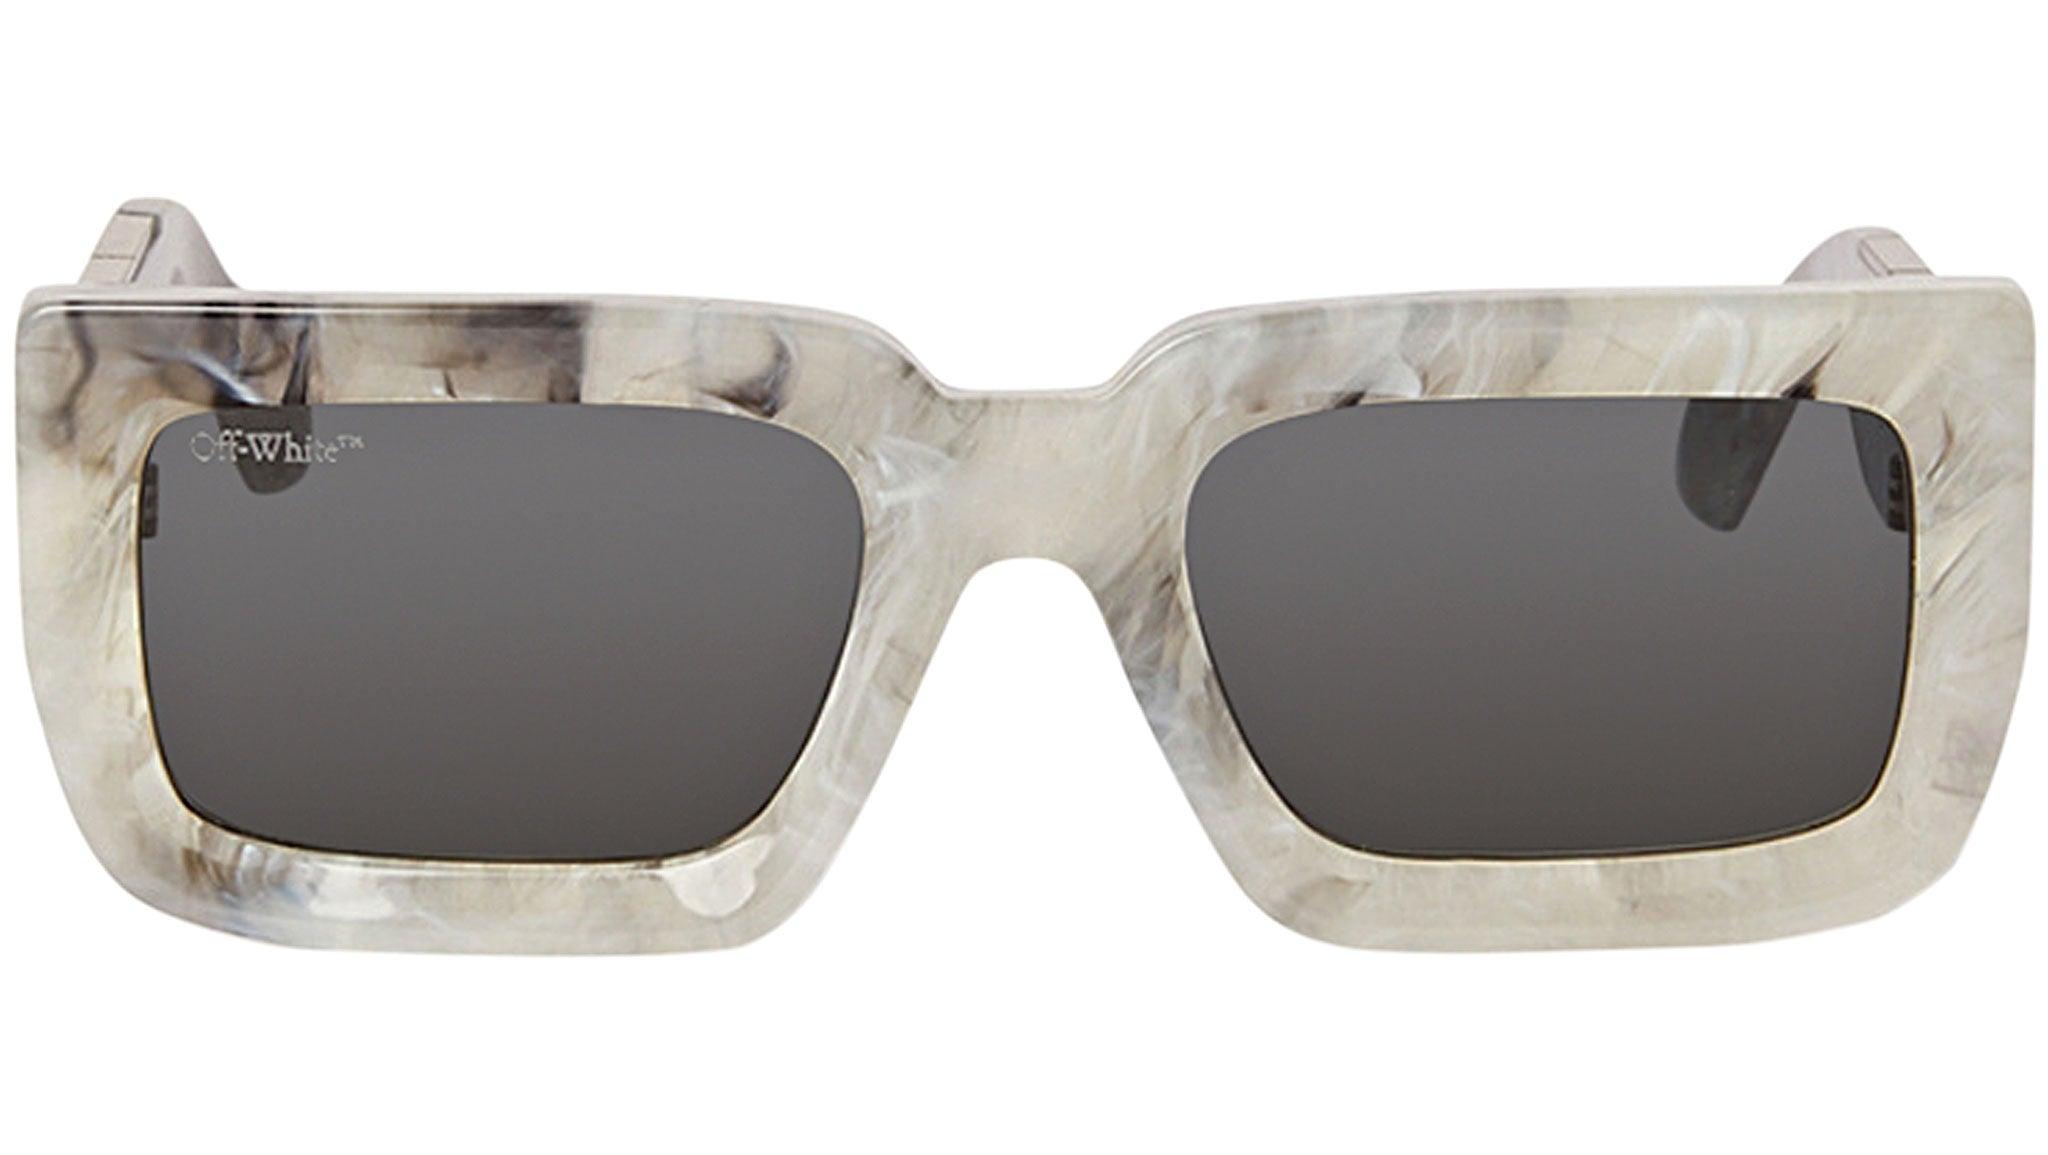 Off-White Dark Grey Marble Boston Sunglasses - Men from Brother2Brother UK